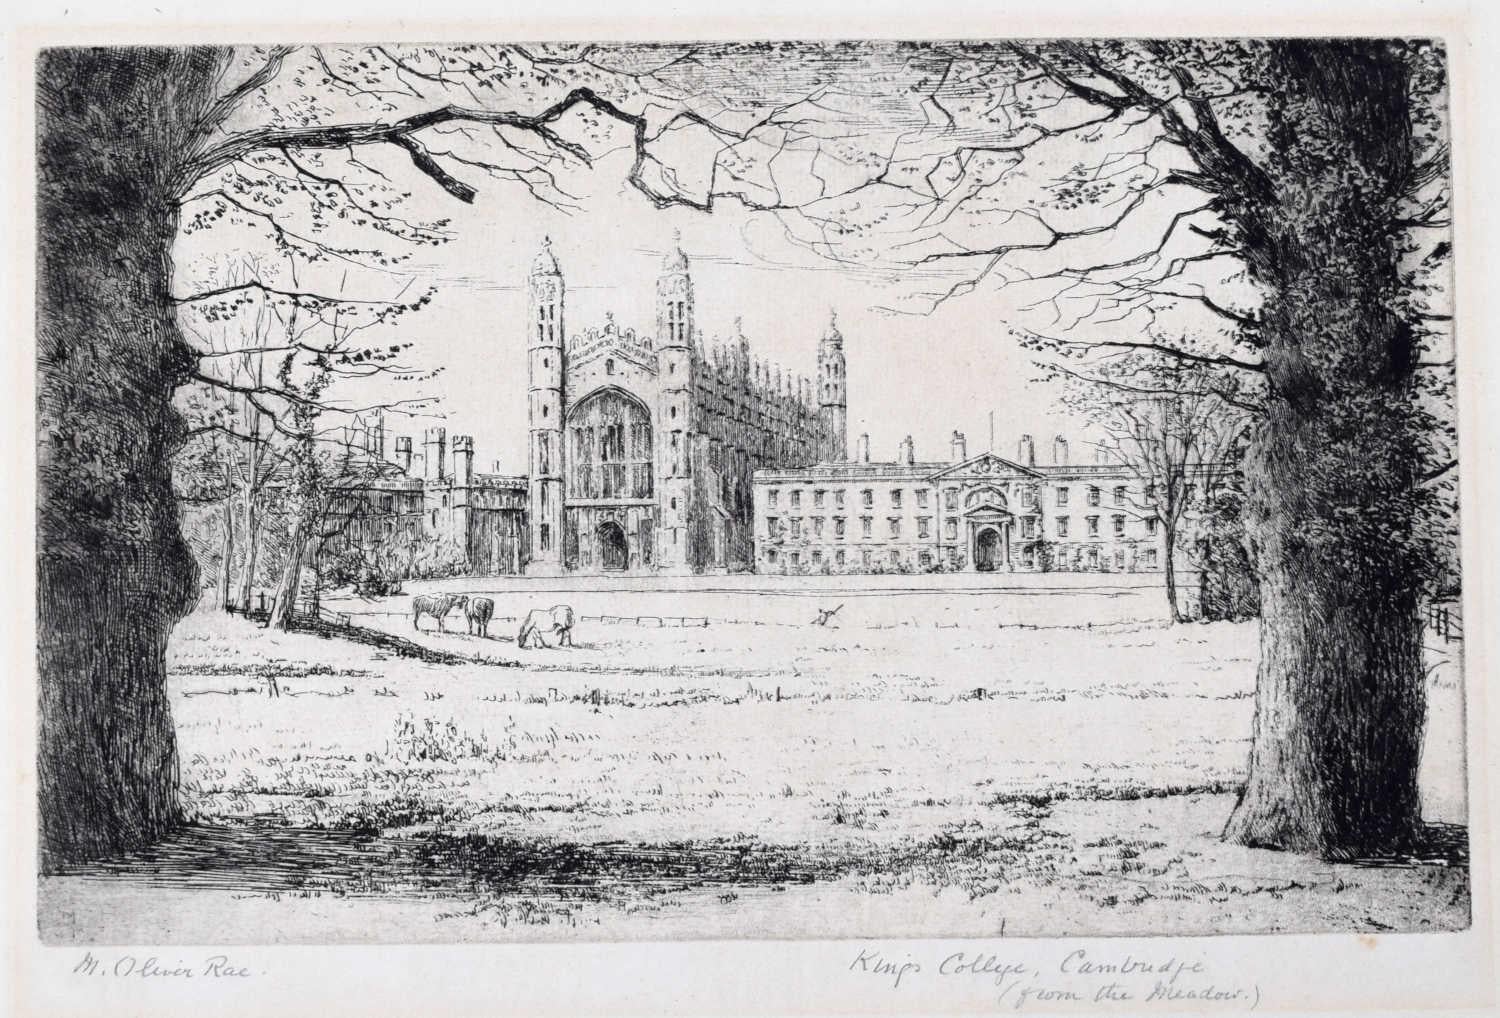 Mabel Oliver Rae, Etching of Kings College Cambridge from the Meadow (c.1920)